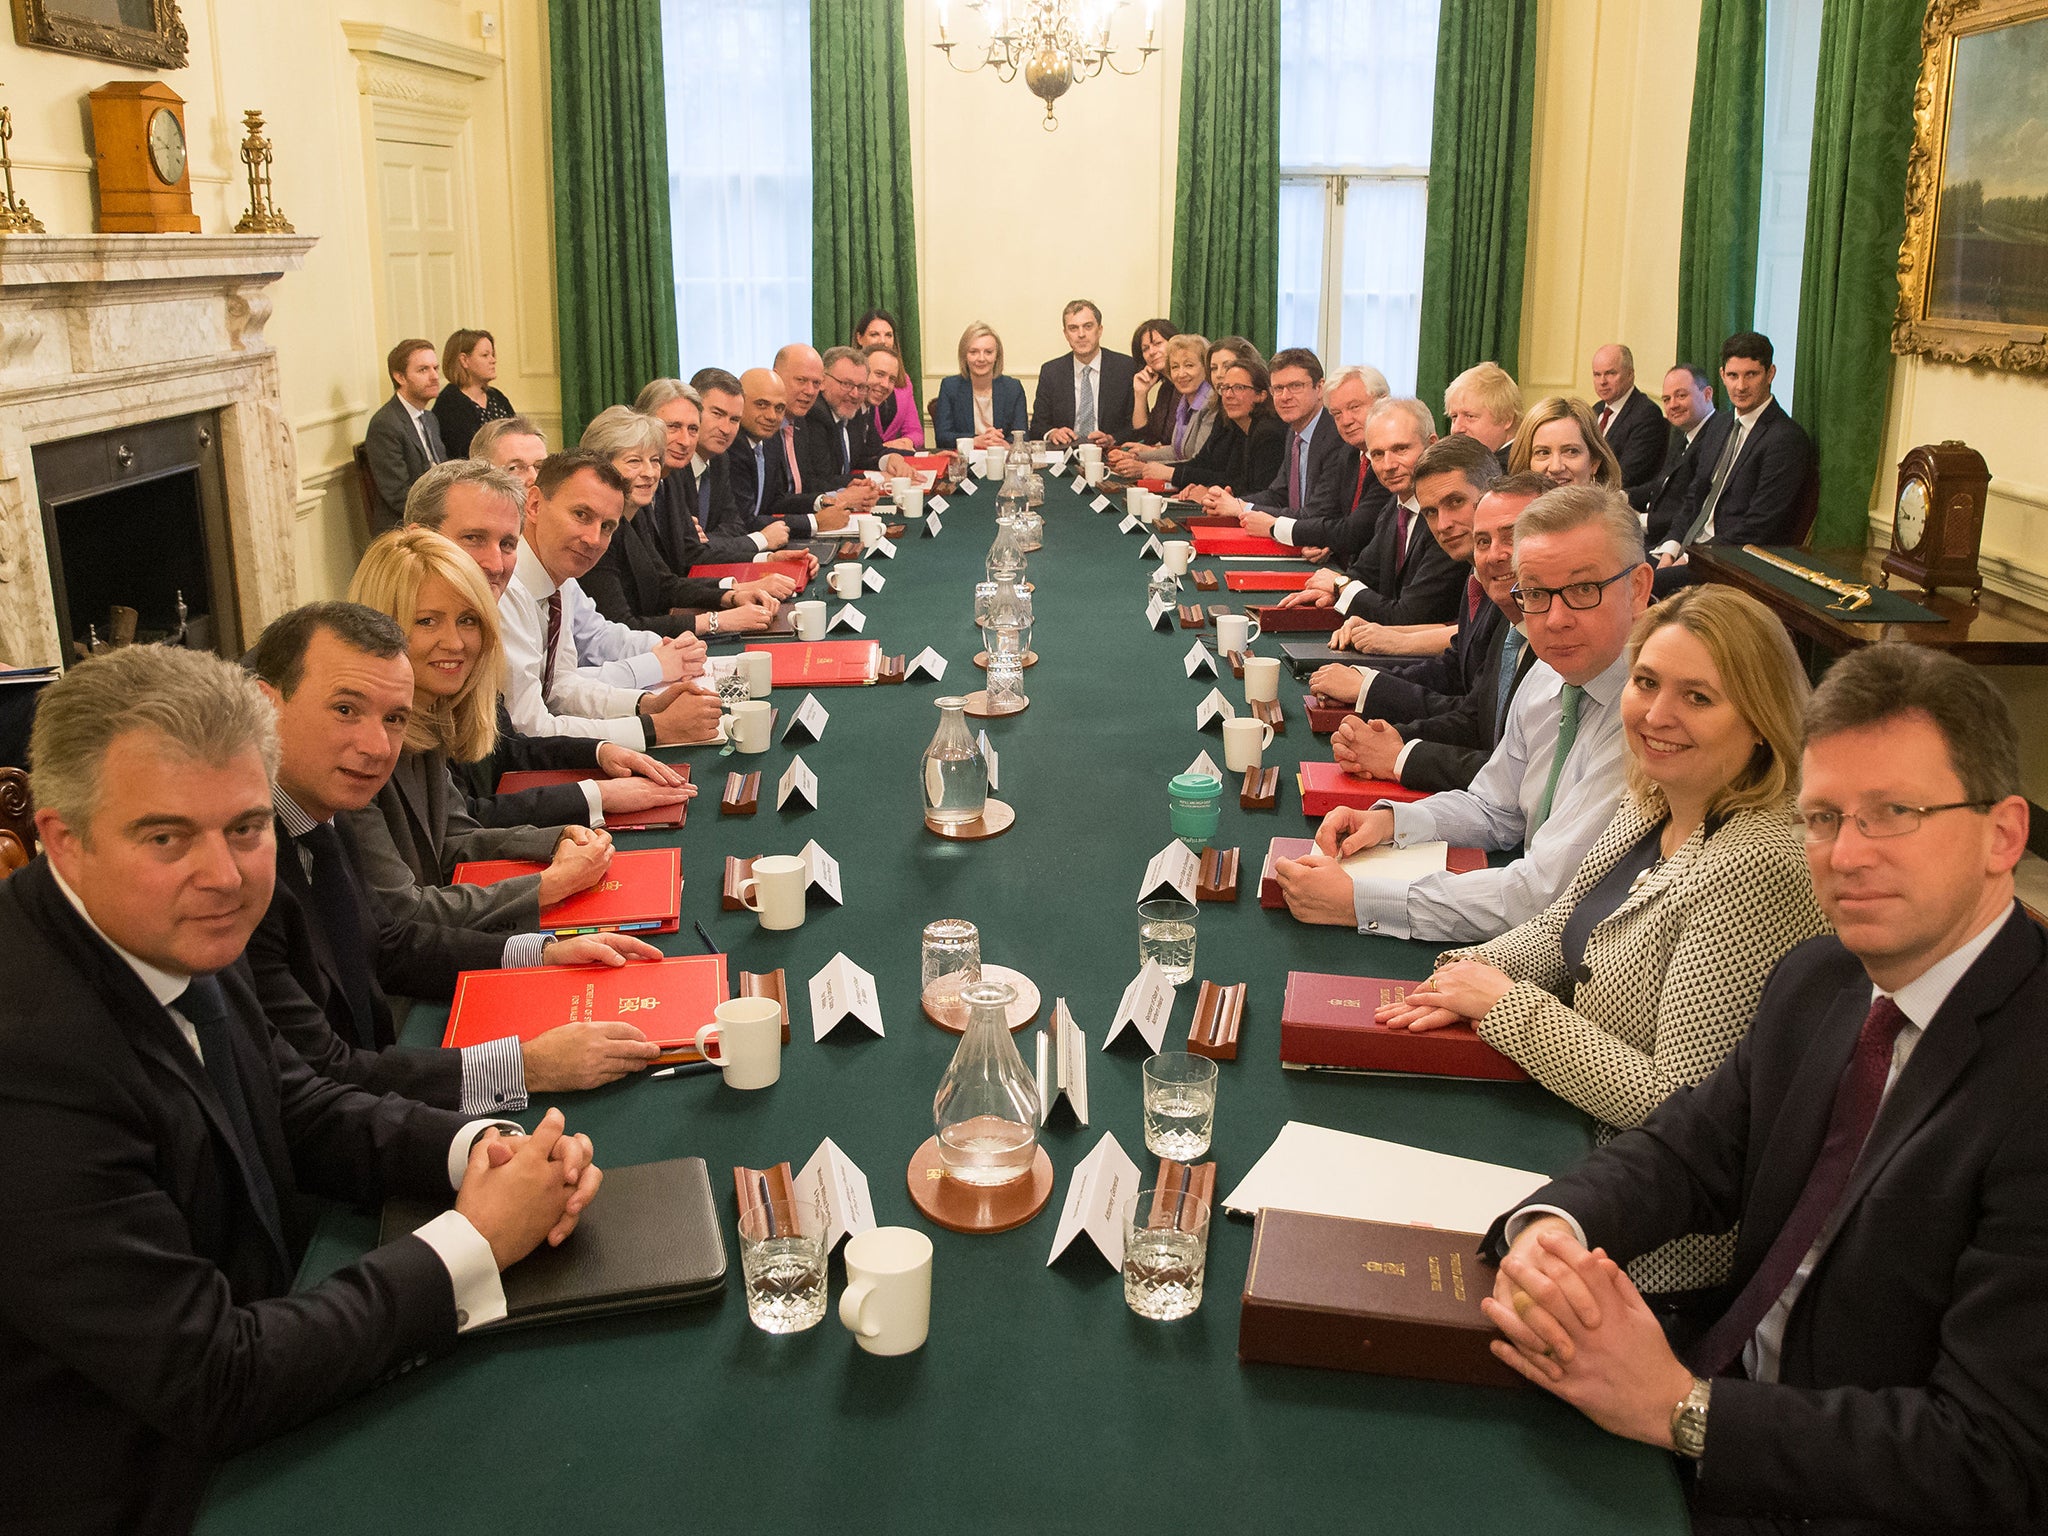 Theresa May S Cabinet Members Now Five Times More Likely To Be